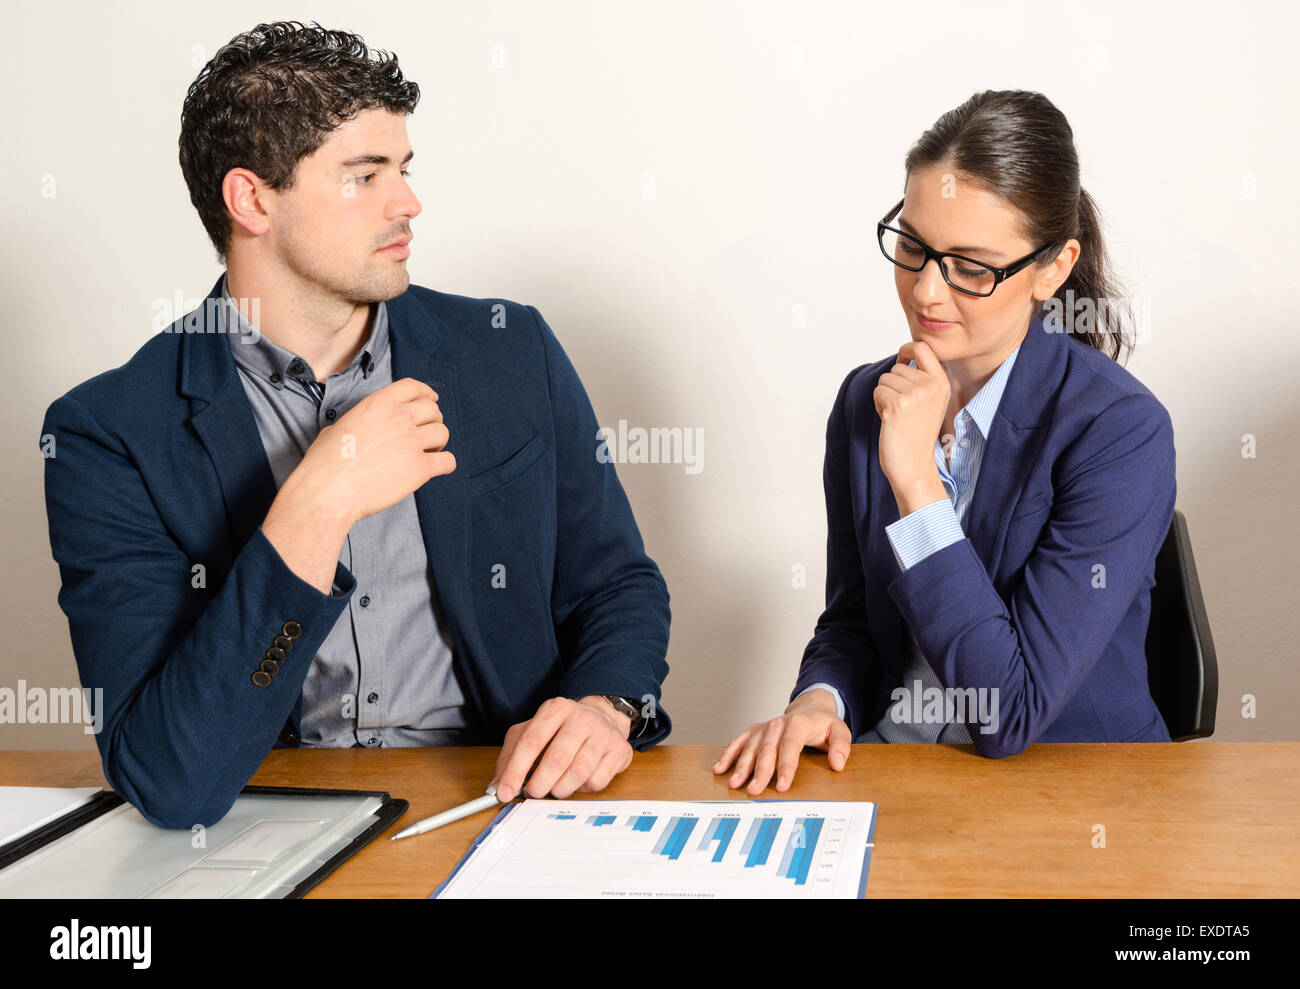 two young business people discussing Stock Photo